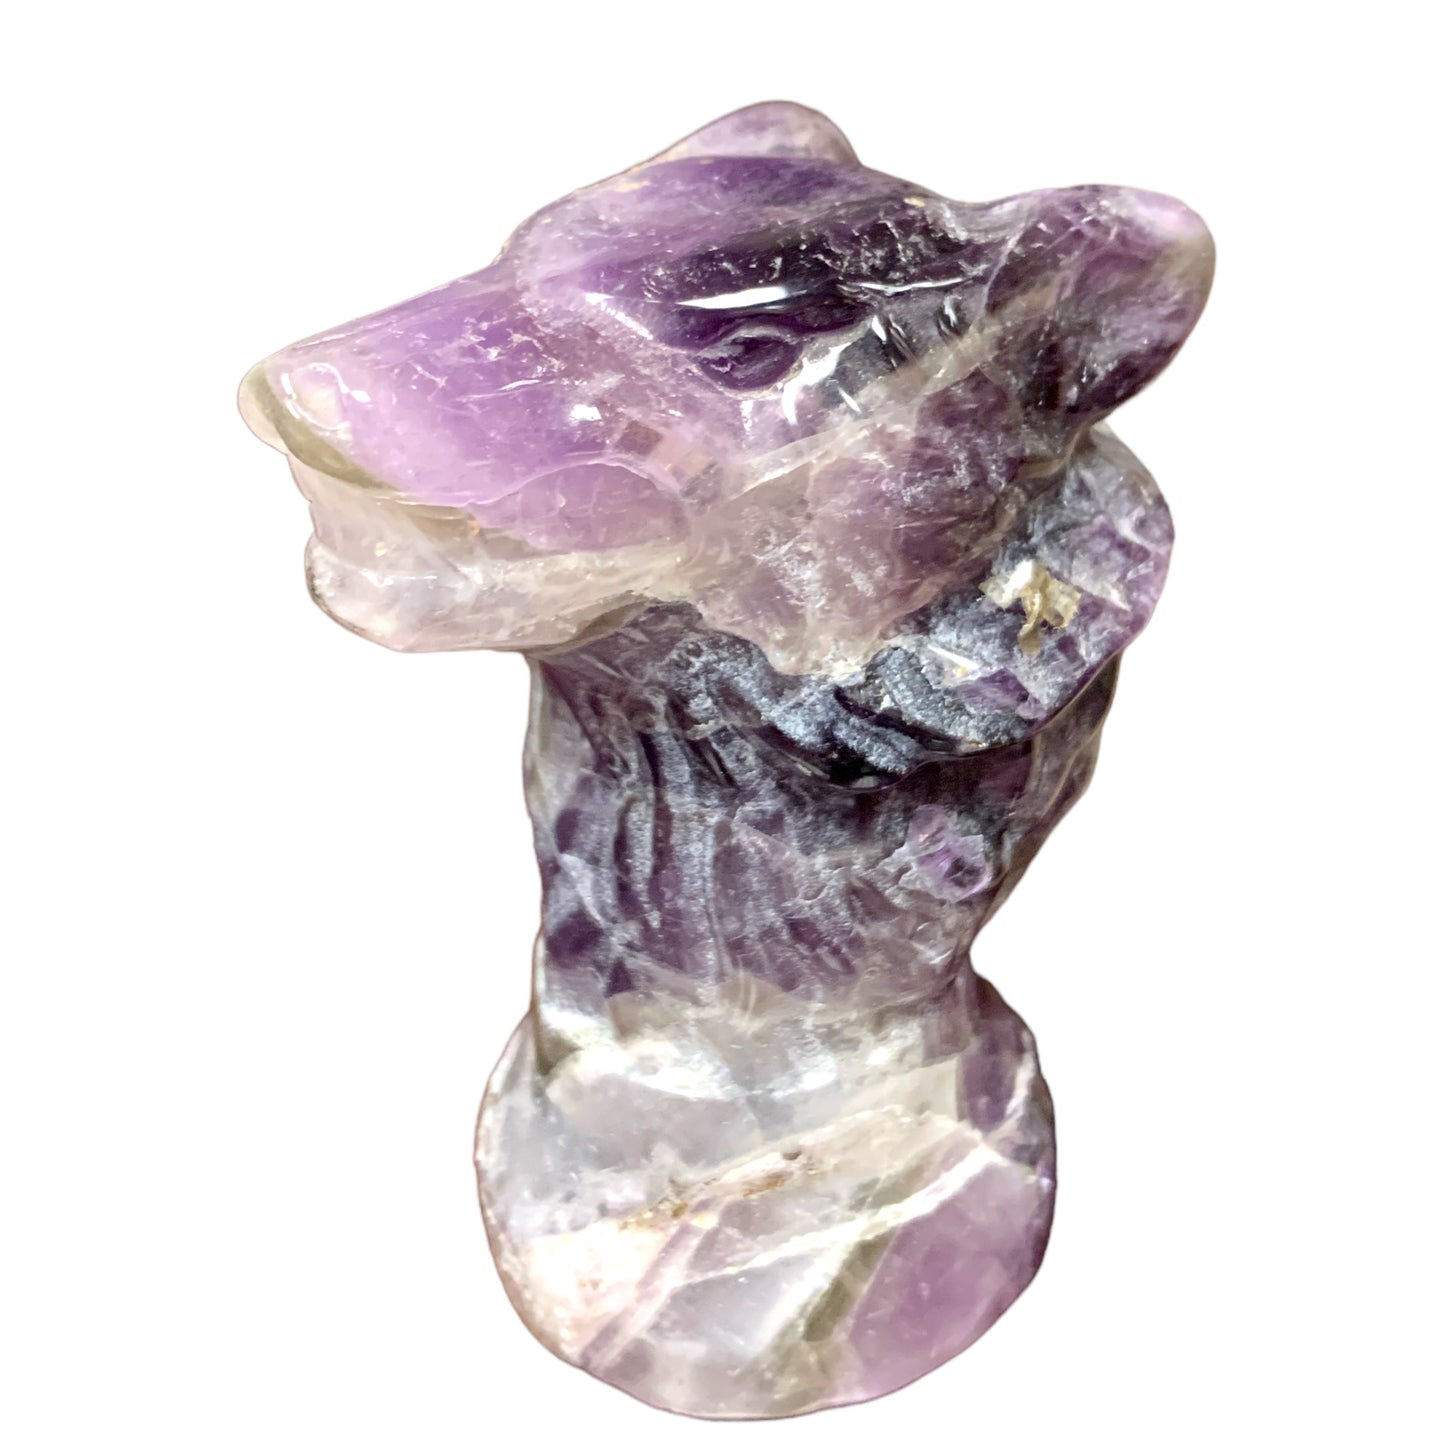 3" WOLF HEAD Amethyst - Price Each - China - NEW622